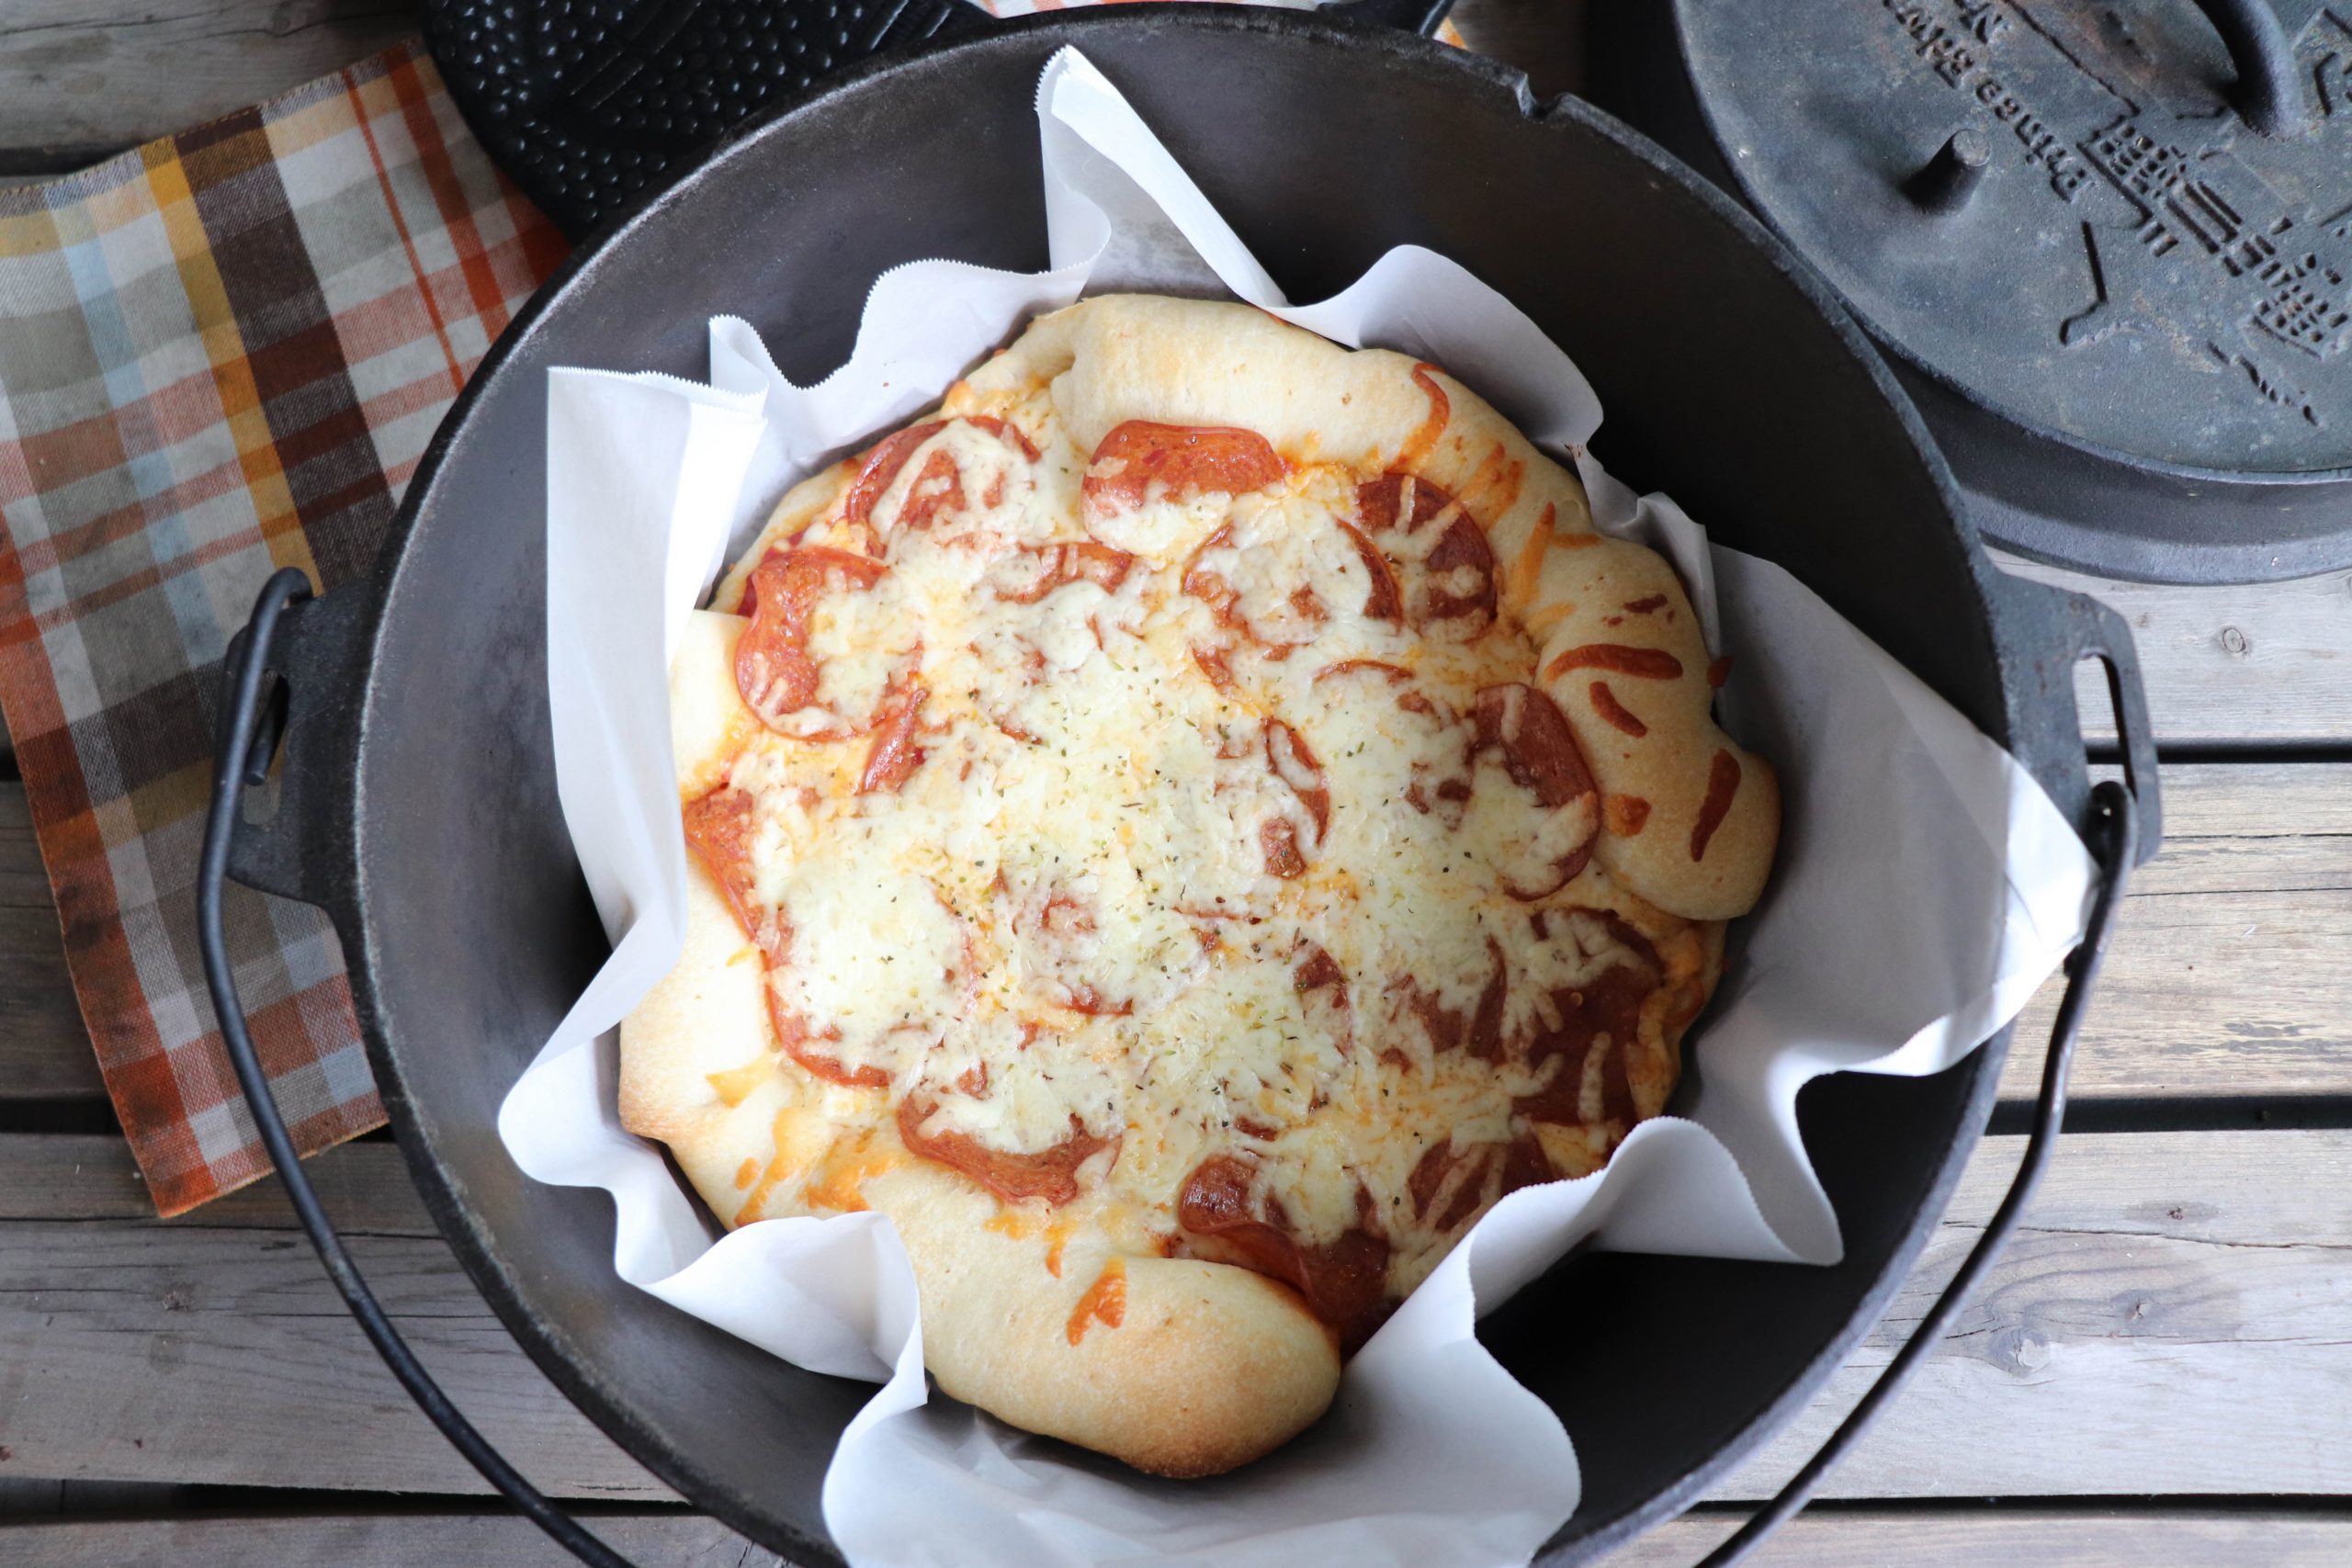 https://campfirefoodie.com/wp-content/uploads/2021/05/Dutch-Oven-Pizza-Recipe-9-scaled.jpg